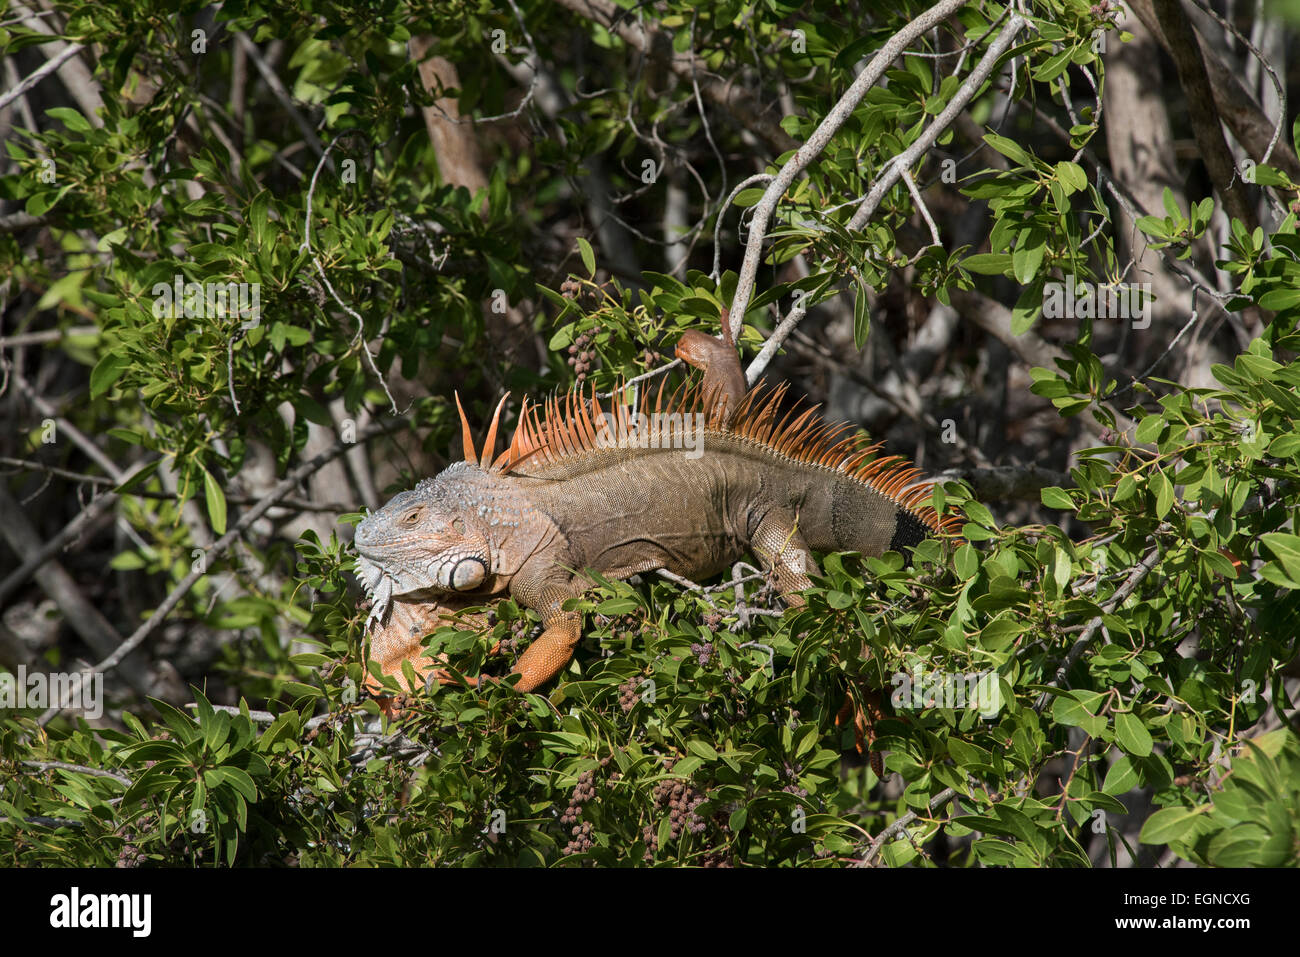 A green iguana perched in a mangrove tree in Key West, Florida Stock Photo